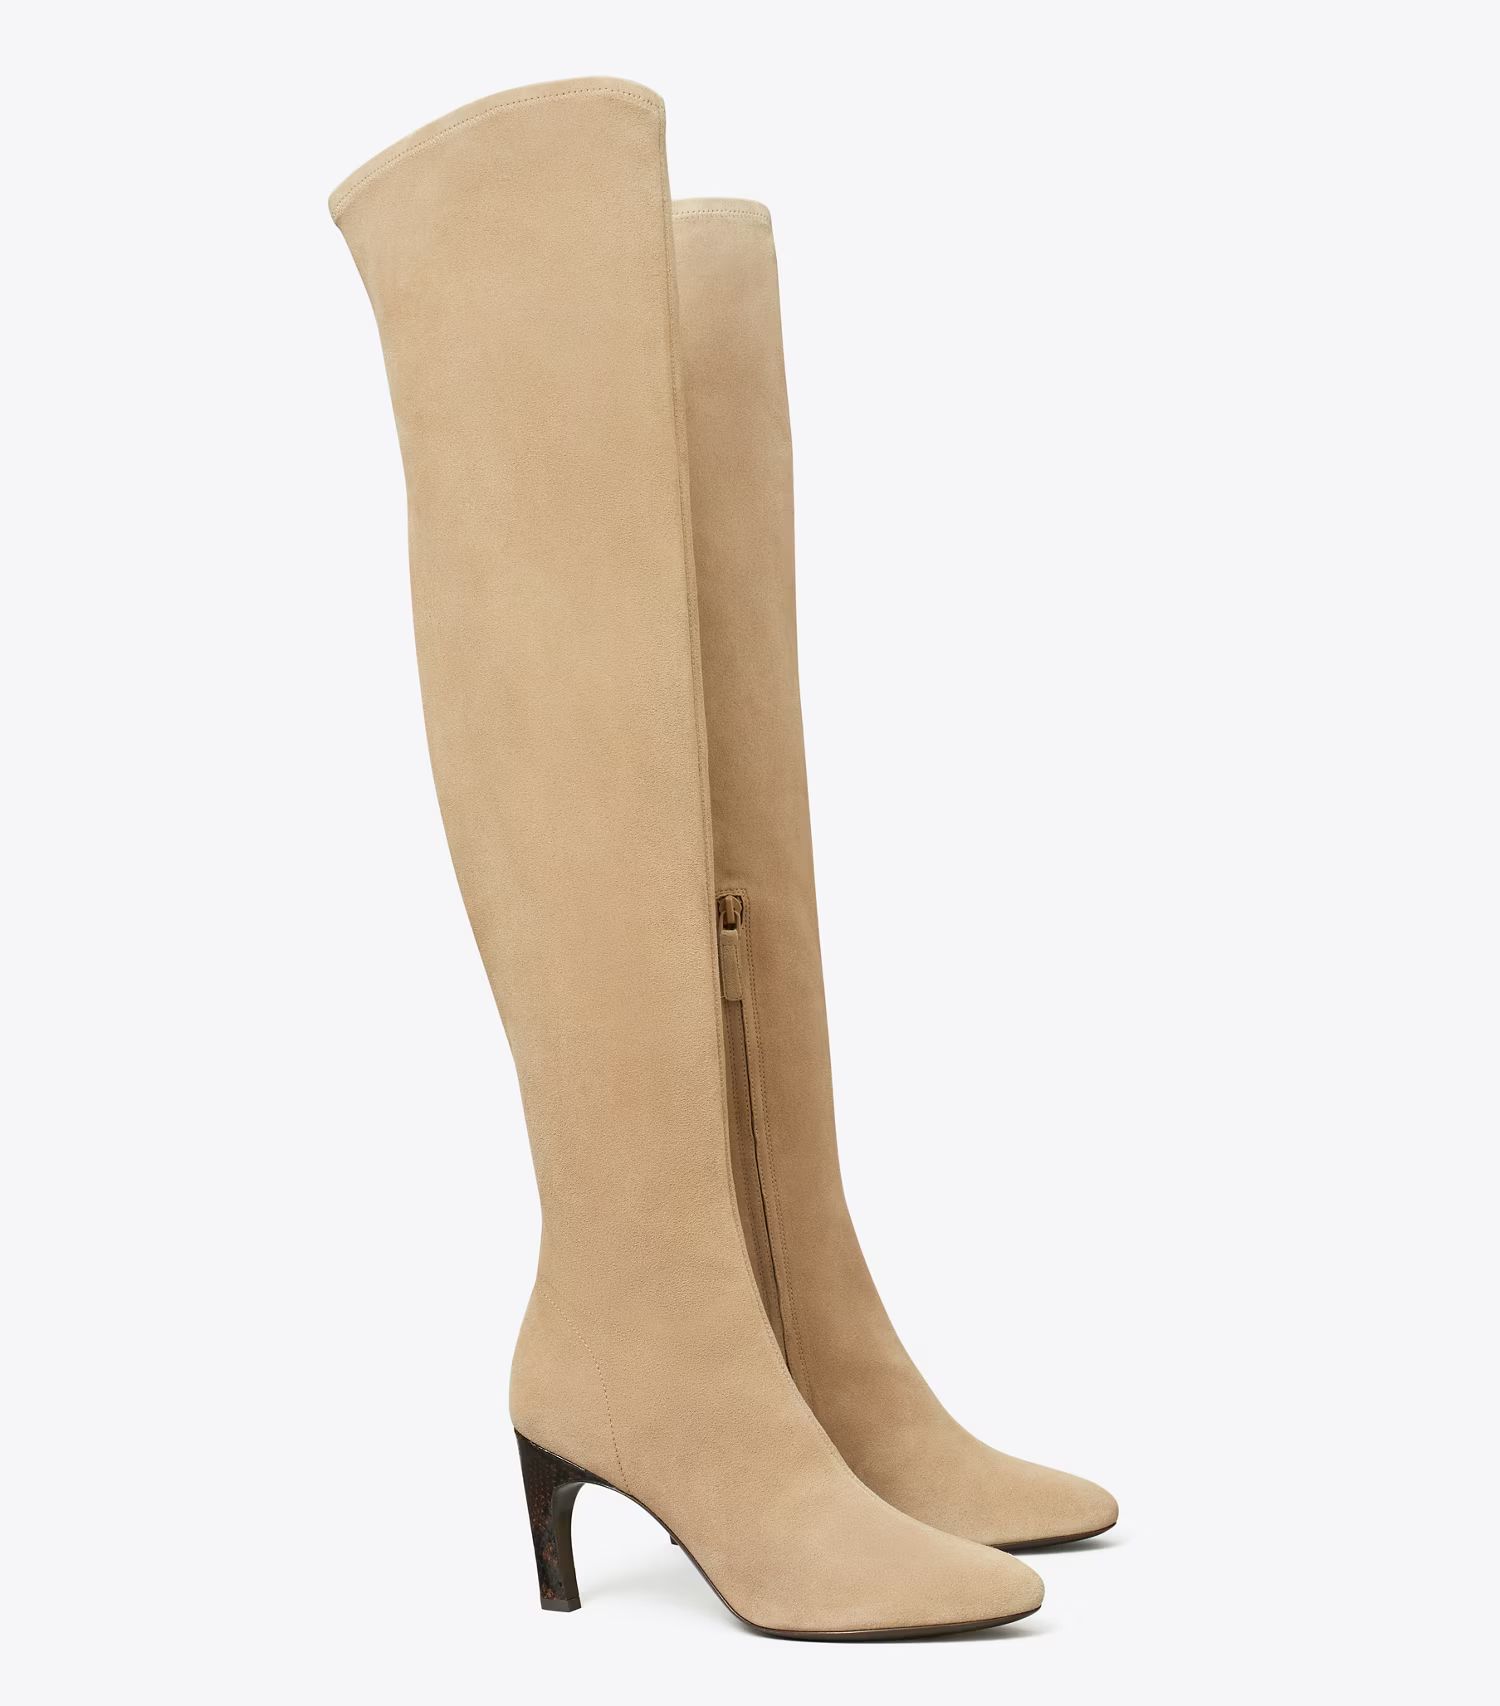 Over-the-Knee Heeled Suede Boot: Women's Designer Boots | Tory Burch | Tory Burch (US)